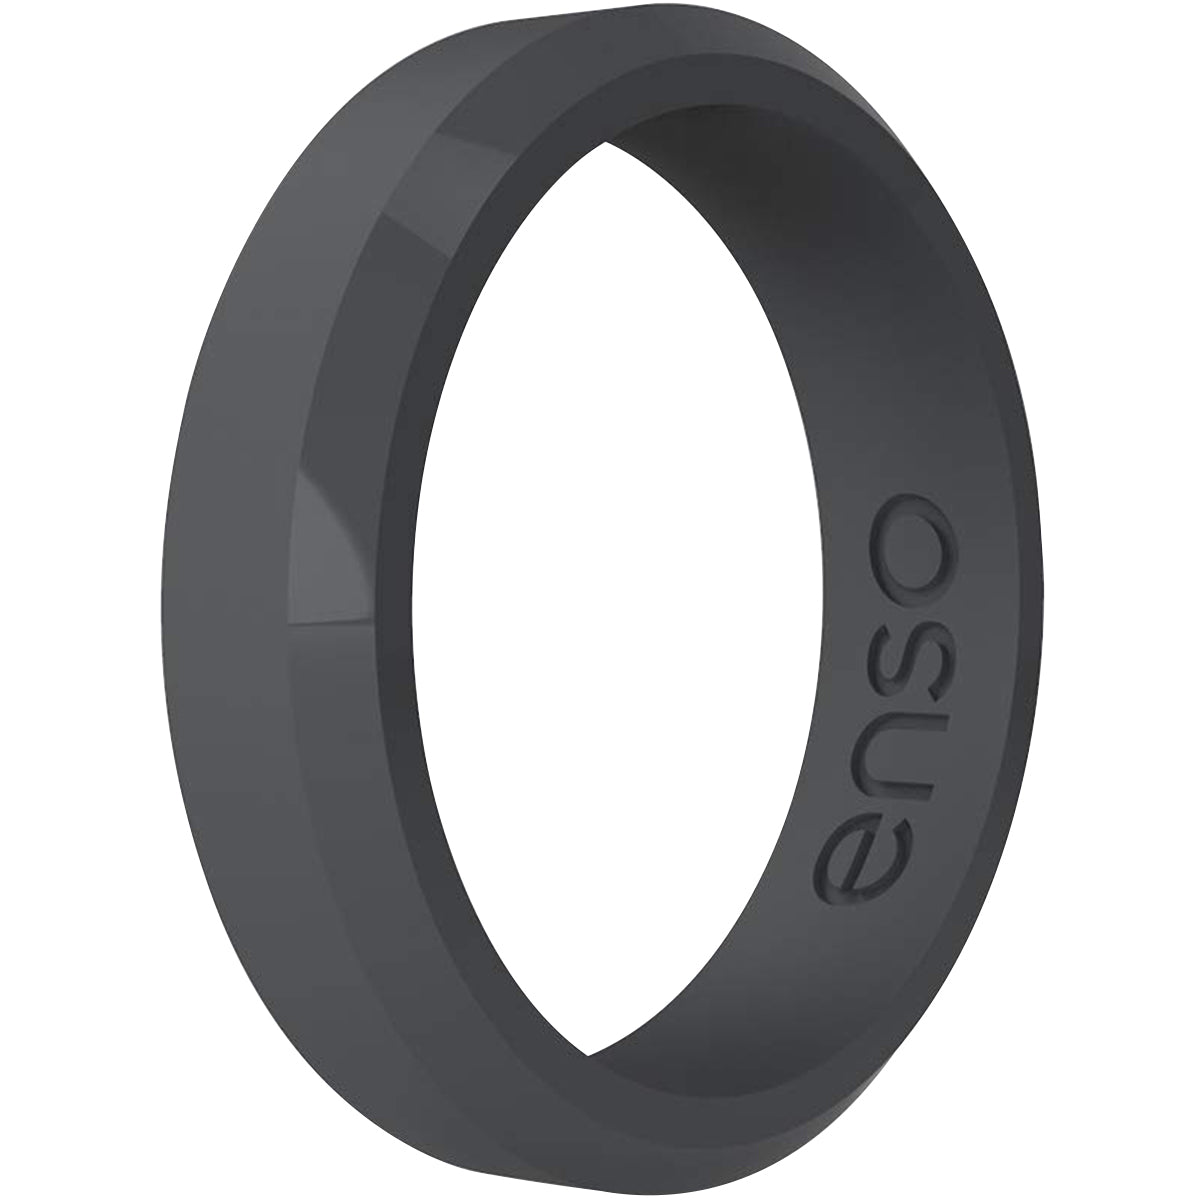 Enso Rings Thin Bevel Series Silicone Ring - Slate Enso Rings